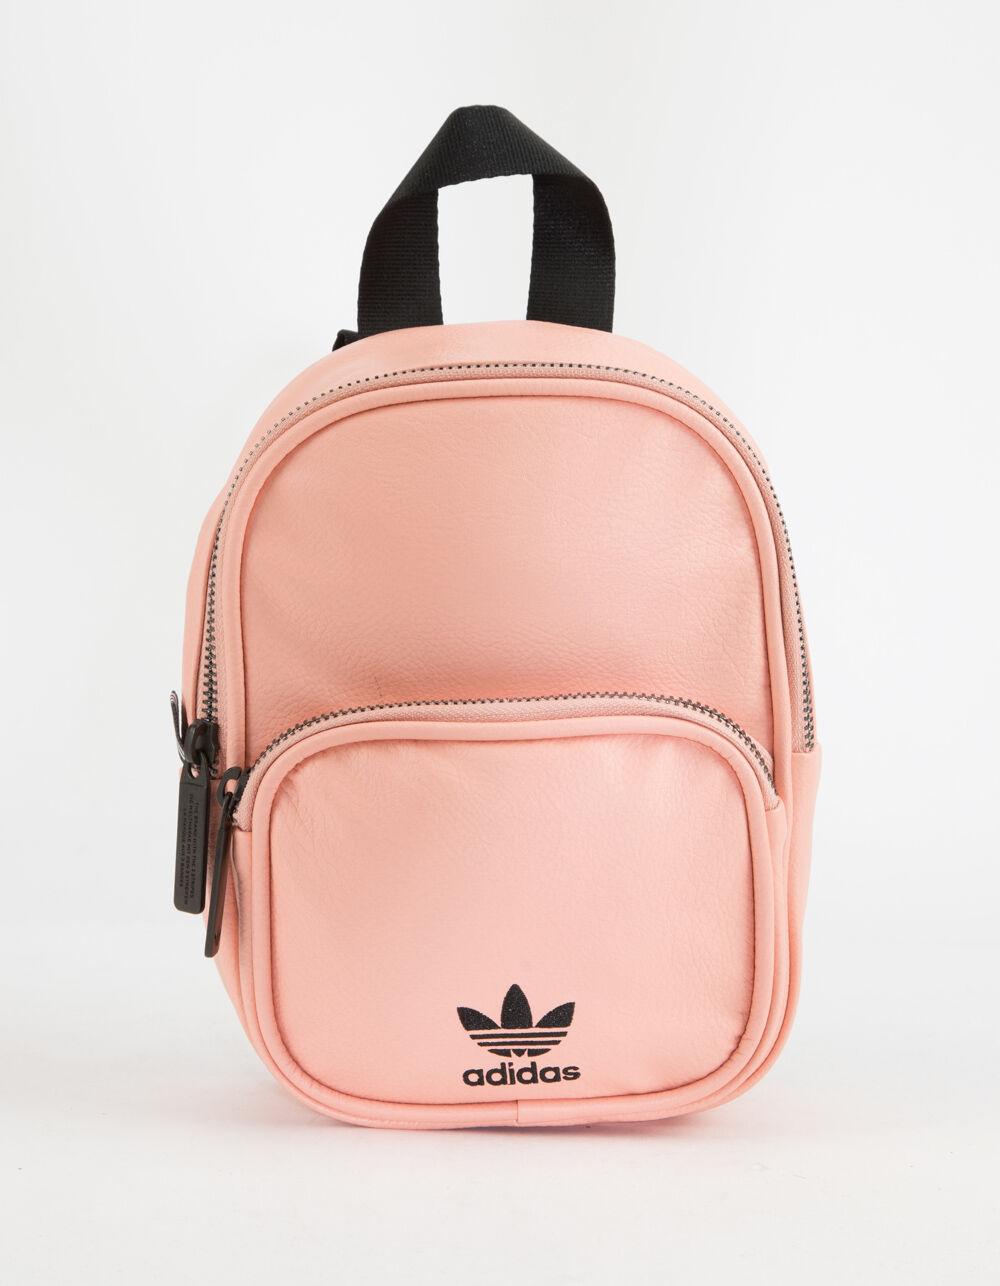 adidas Originals Faux Leather Pink Mini Backpack - Lyst